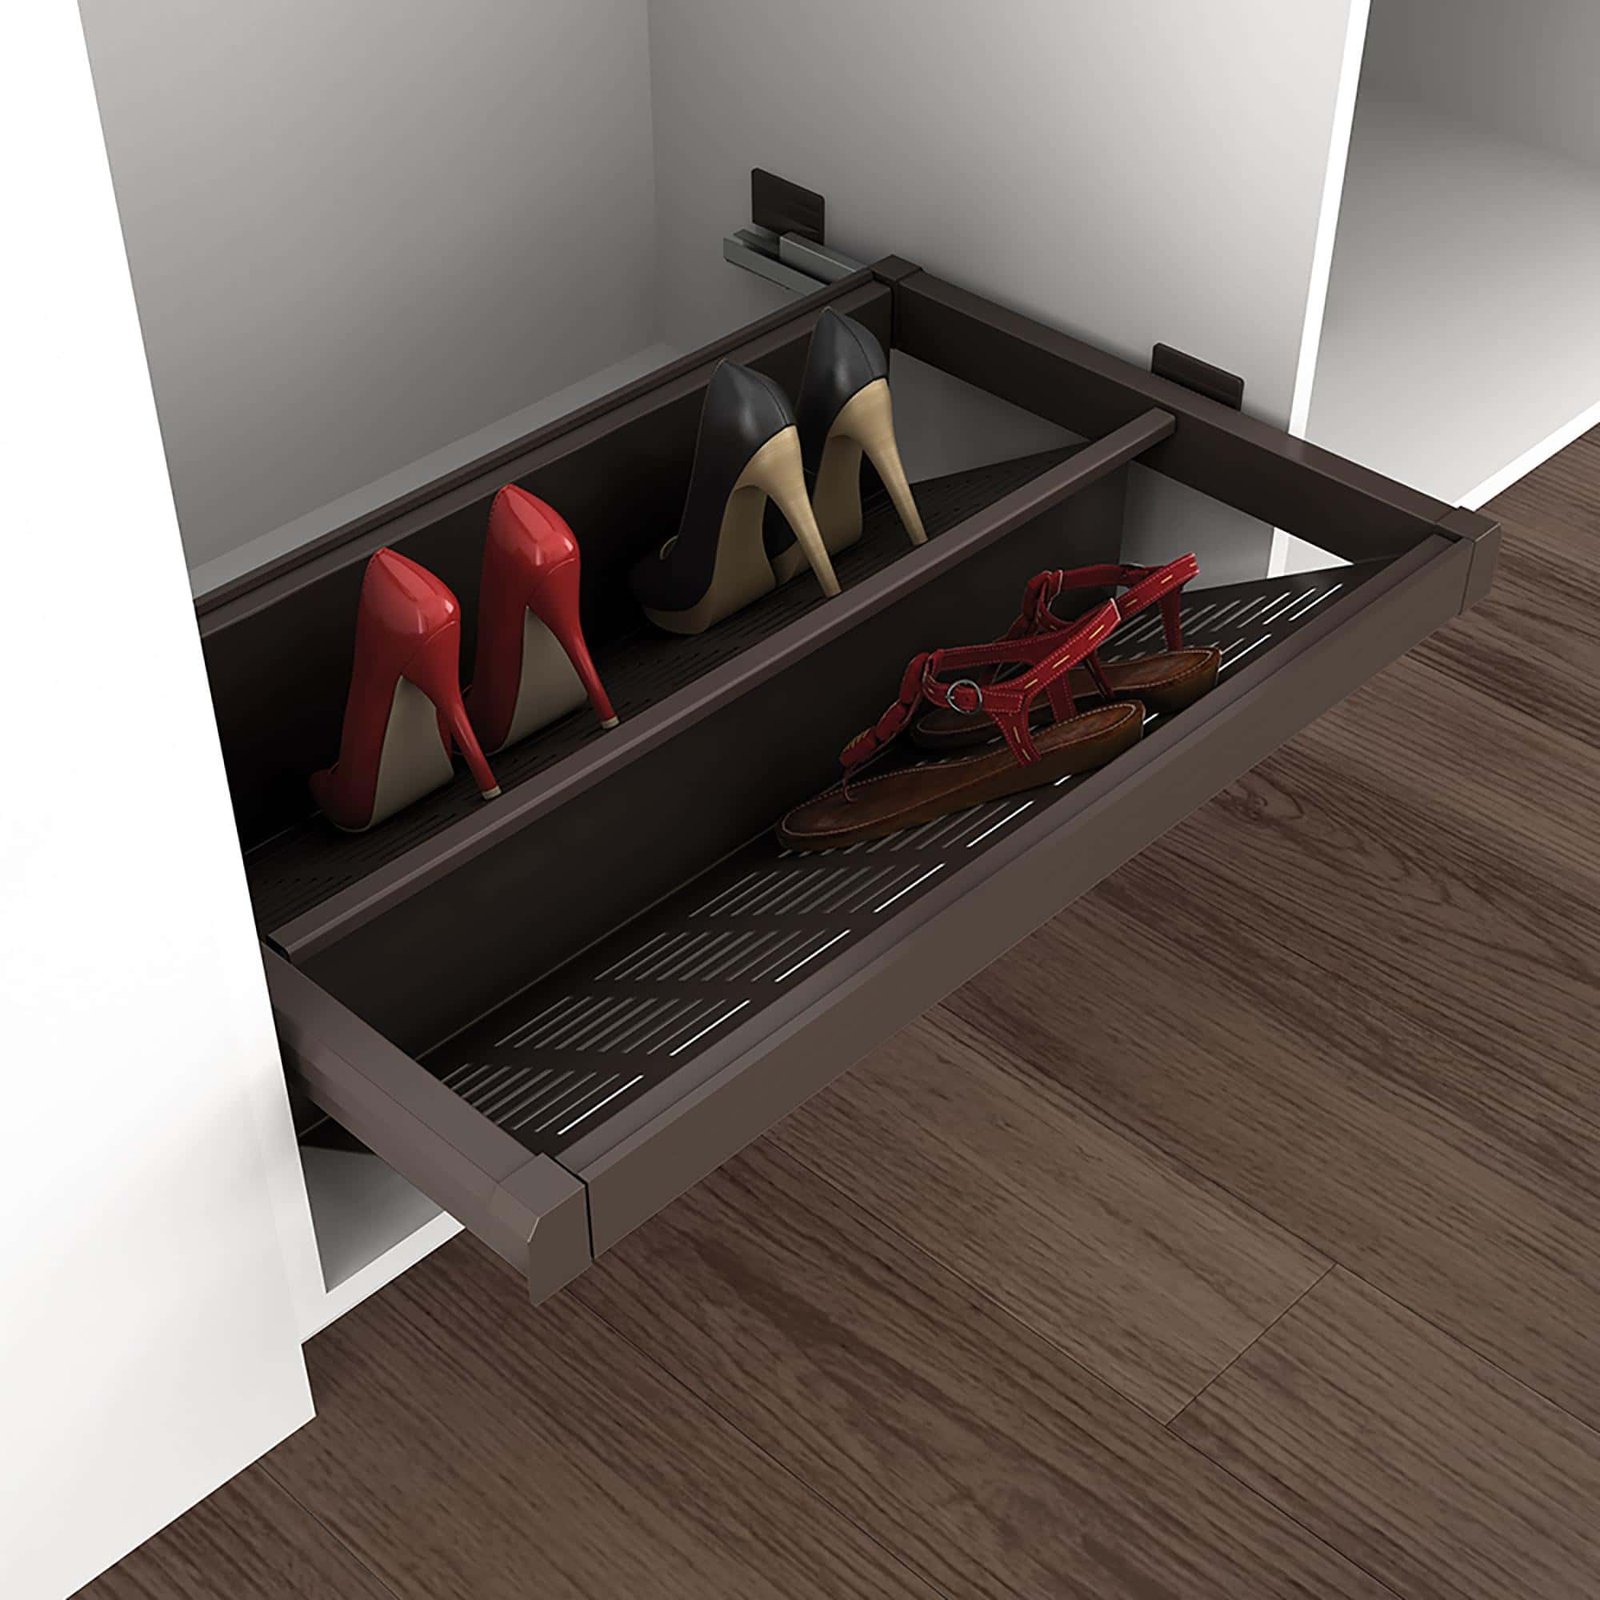 Shoe drawer in frame with runners